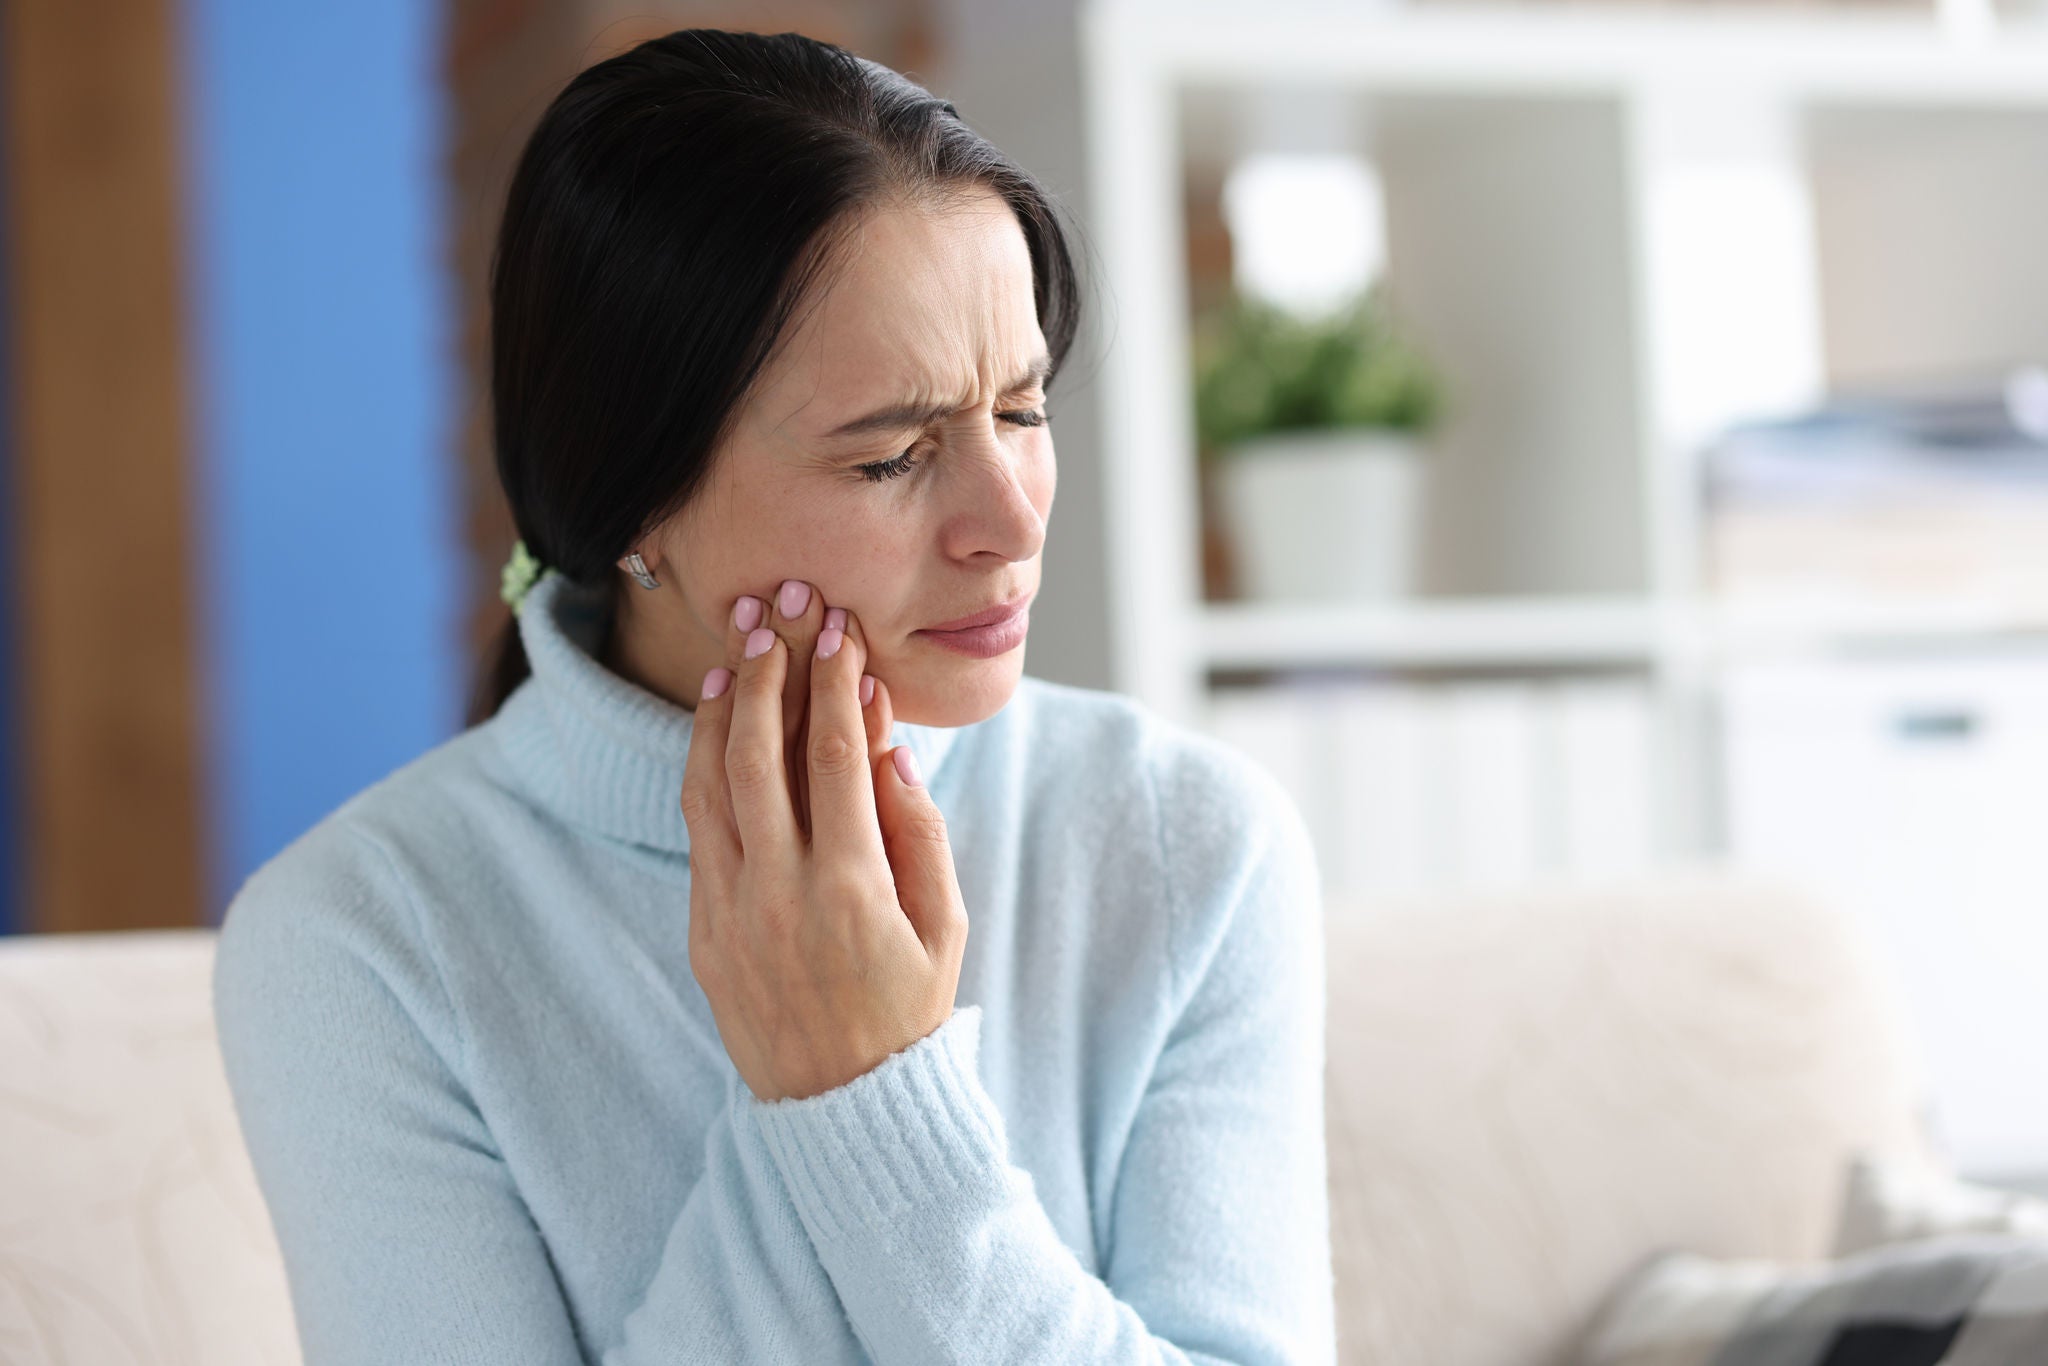 Tooth Sensitivity: Causes, How to Manage and Prevent It